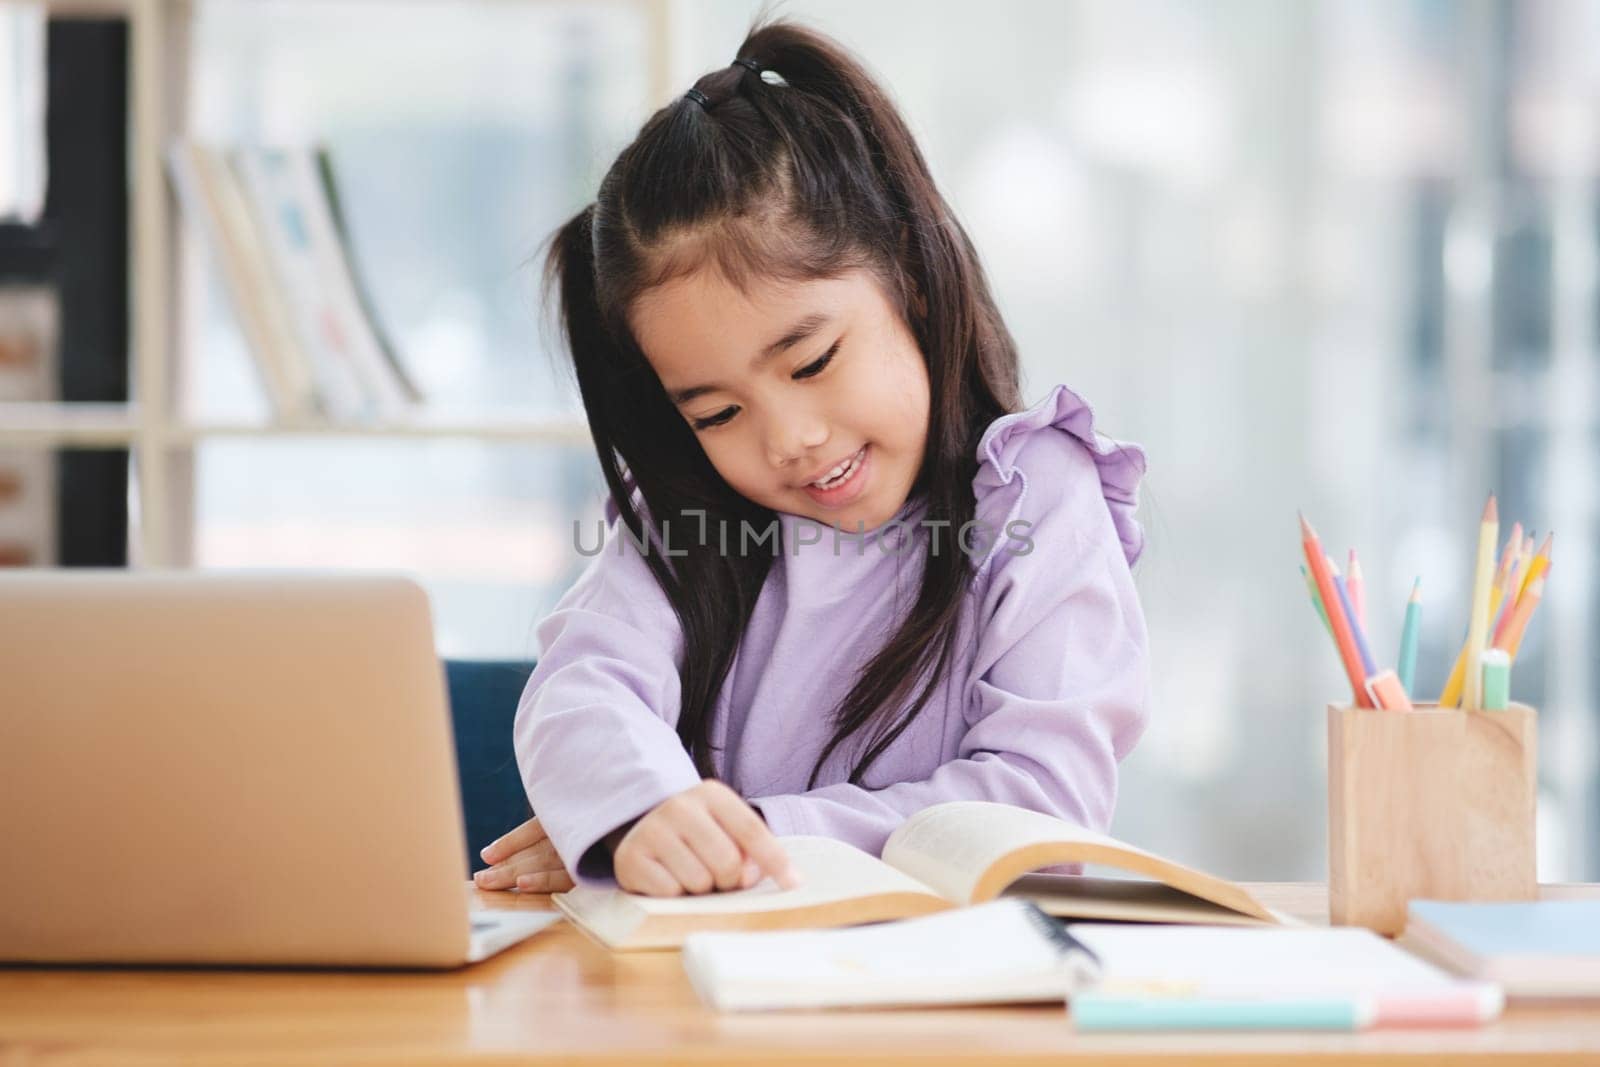 A young girl is sitting at a desk with a laptop and a book. She is smiling and she is enjoying her work